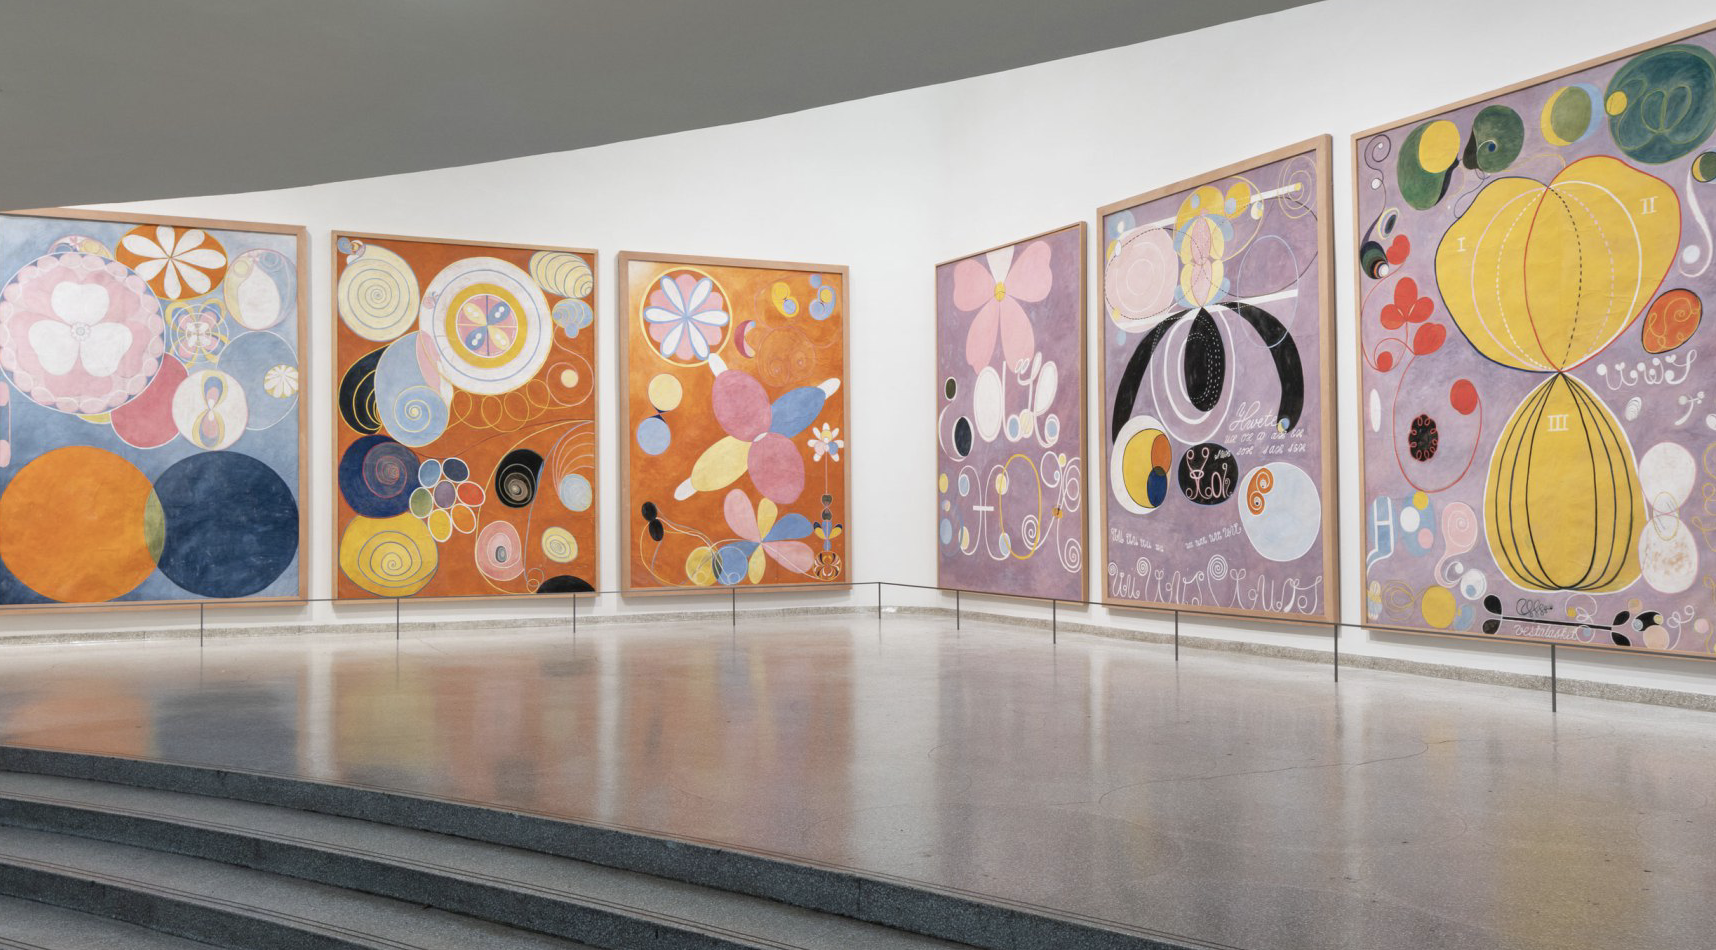 Installation view: Hilma af Klint: Paintings for the Future, Solomon R. Guggenheim Museum, New York, October 12, 2018–April 23, 2019. Photo: David Heald